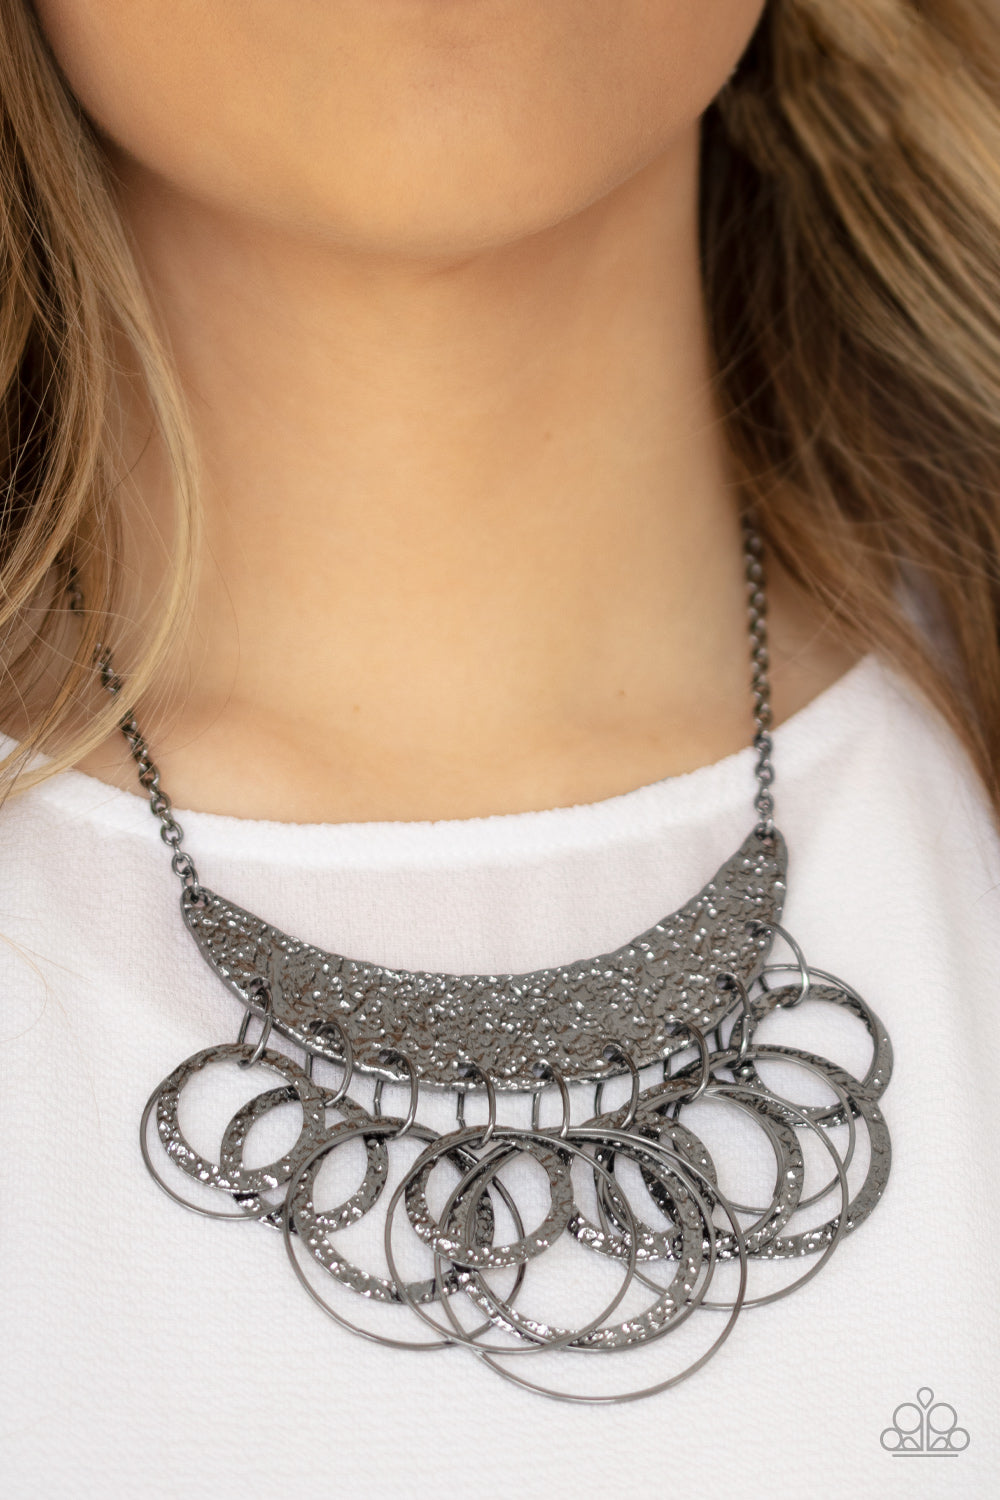 Metro Eclipse Black Necklace - Paparazzi Accessories  Hammered and embossed in a foil-like finish, a gunmetal moon-like frame bows below the collar. Dainty gunmetal hoops and matching hammered rings cascade from the bottom, creating an edgy fringe. Features an adjustable clasp closure.  Sold as one individual necklace. Includes one pair of matching earrings.